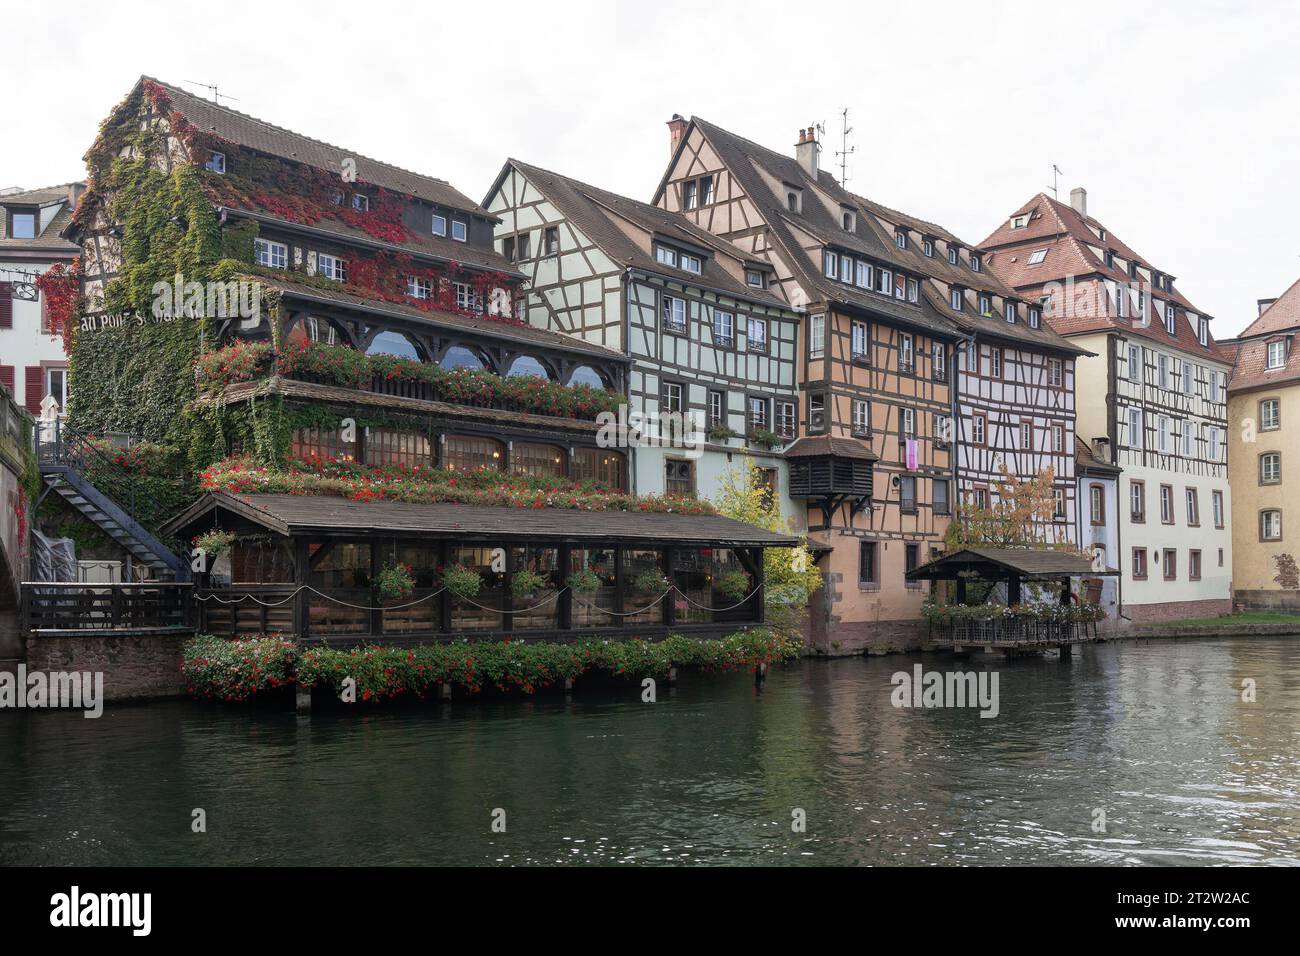 View of the Tanner's Quarter with colored half-timbered buildings and the river Ill Stock Photo